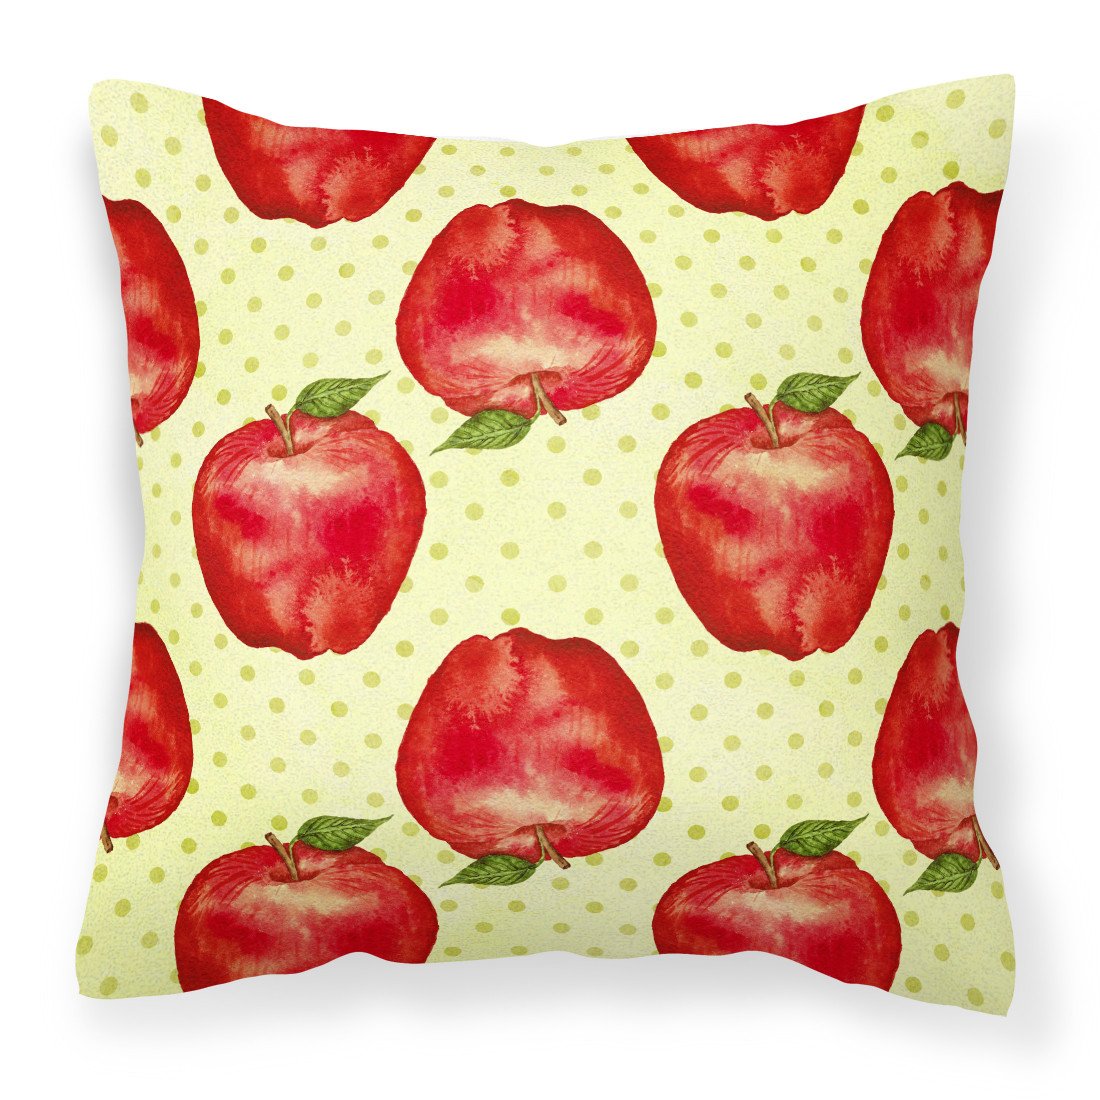 Watercolor Apples and Polkadots Fabric Decorative Pillow BB7516PW1818 by Caroline's Treasures